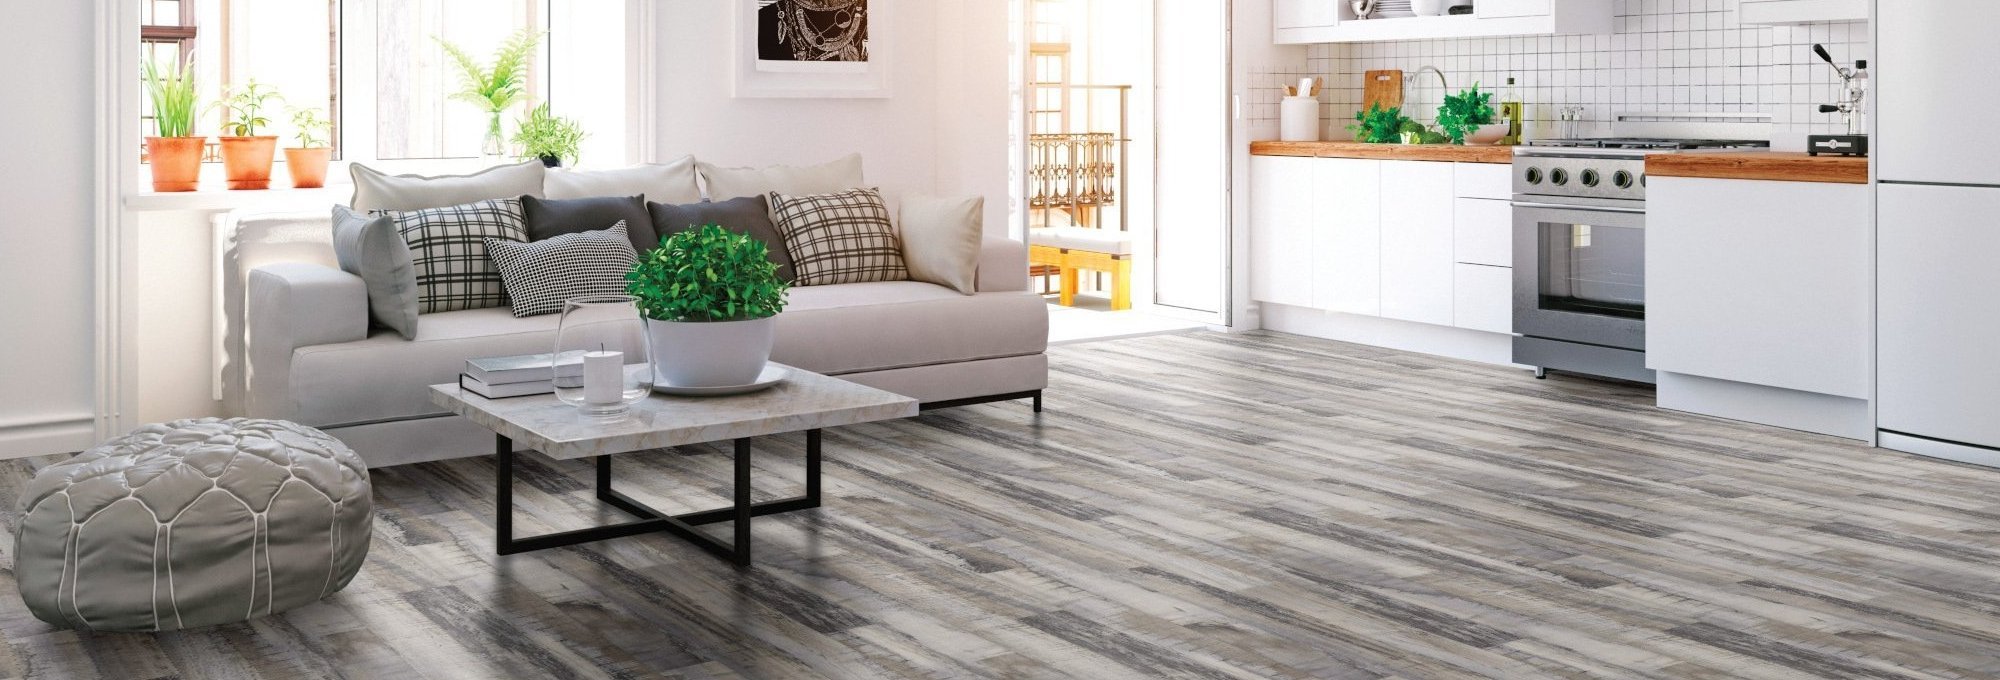 Living room with gray wood-look laminate flooring from New Horizon Carpets in the Hemet, CA area